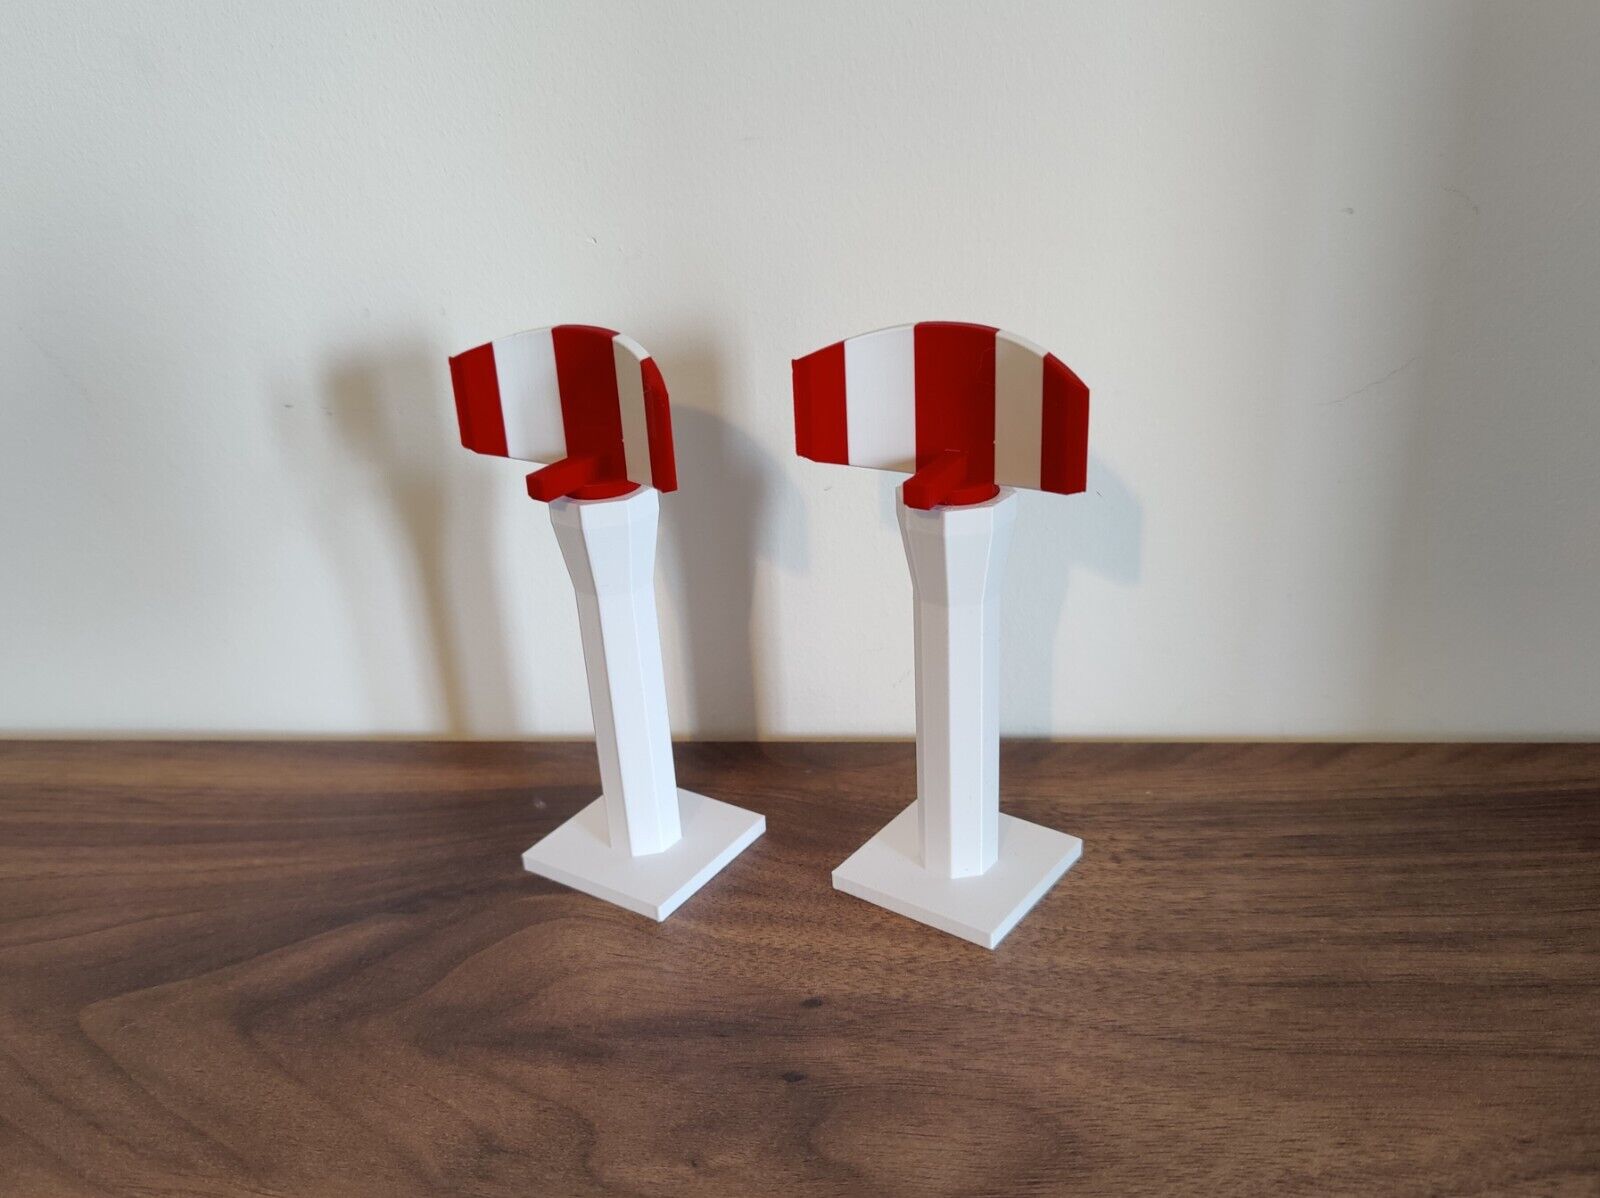 2x Red & White Small AIRPORT RADAR TOWERS Aircraft Building Models 1:200 Scale